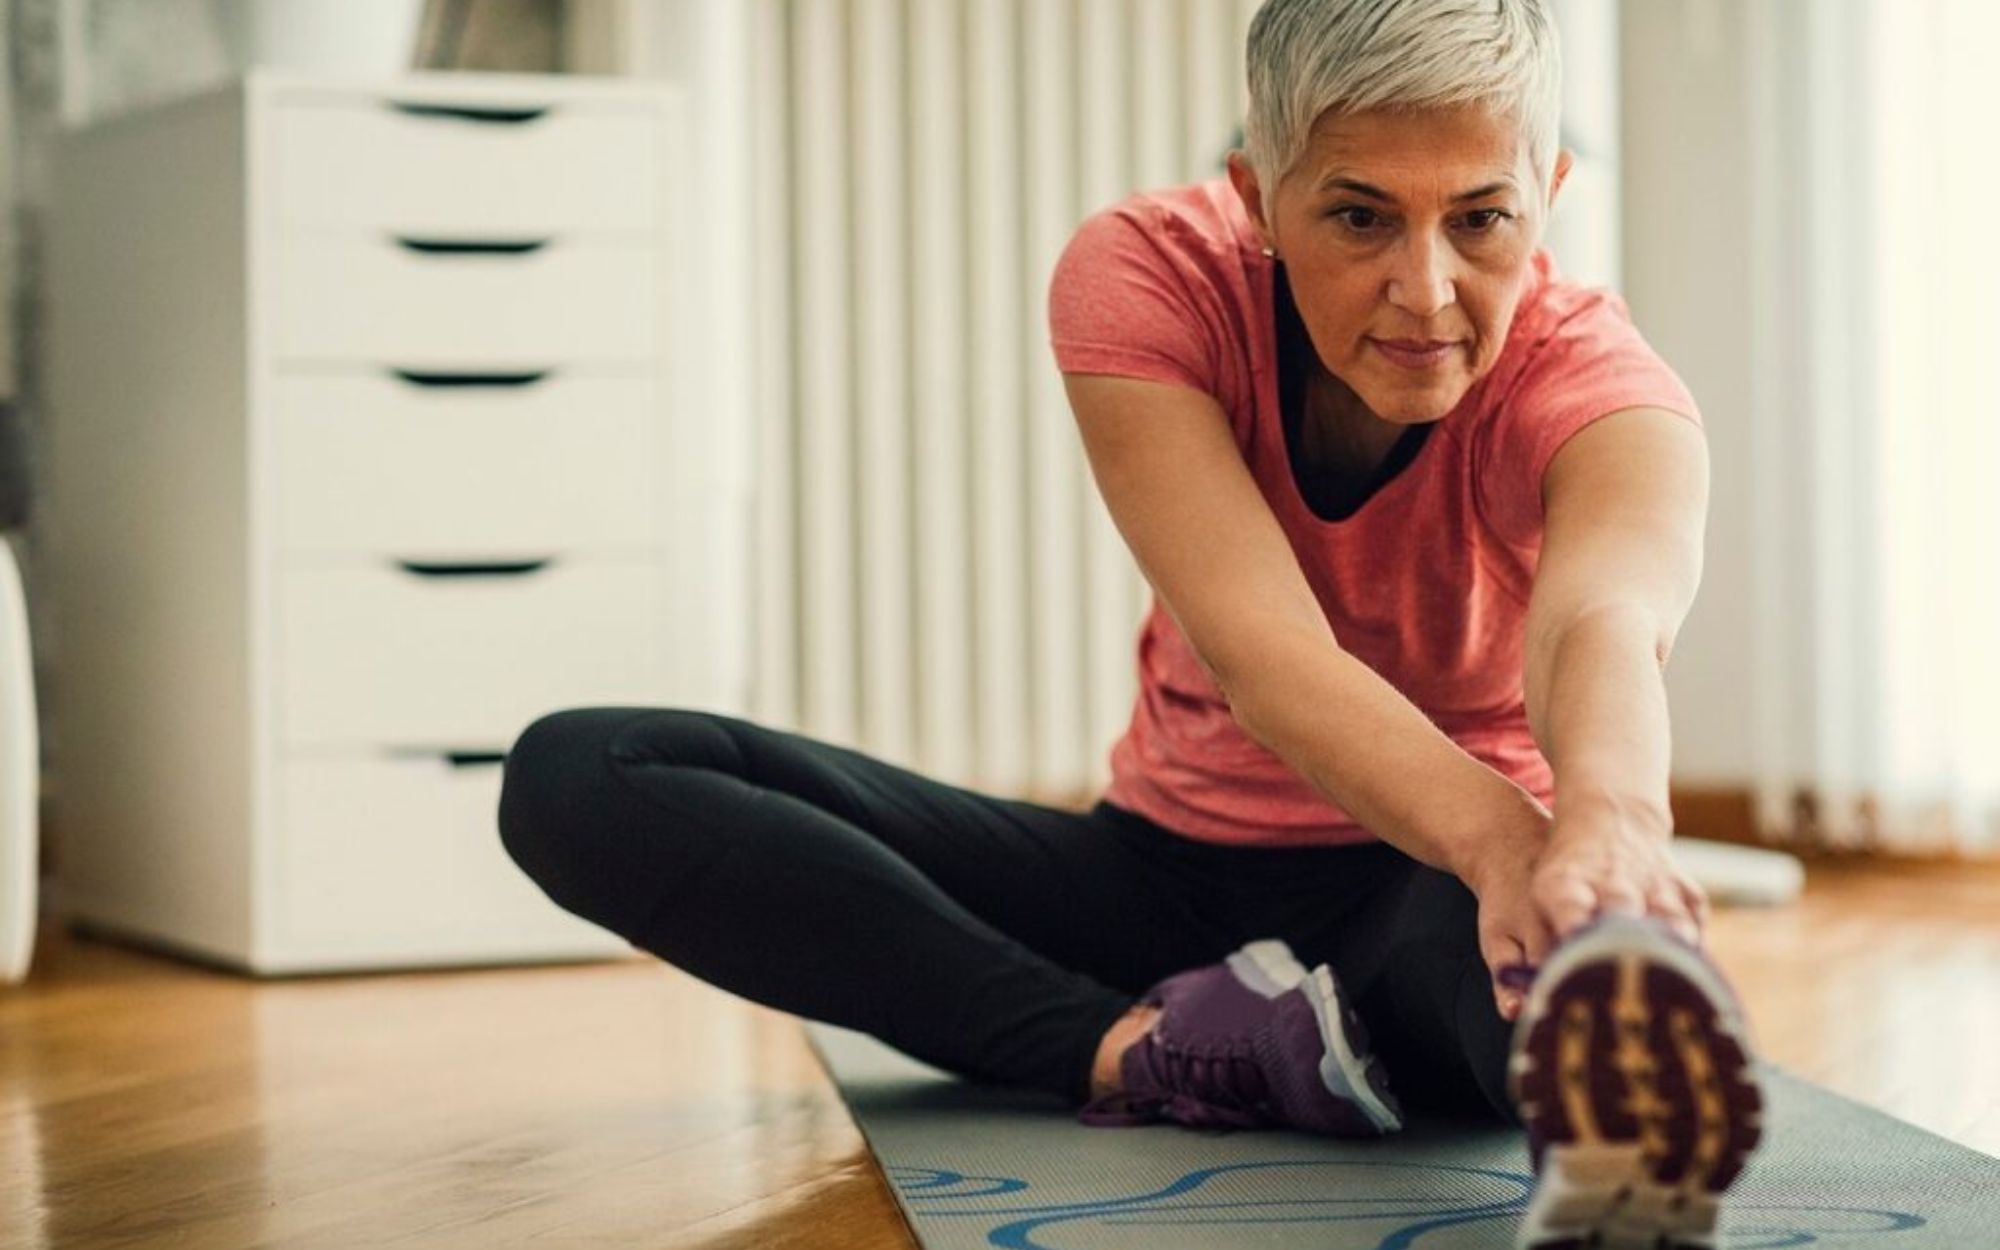 A gray-haired woman is doing some stretching in her room